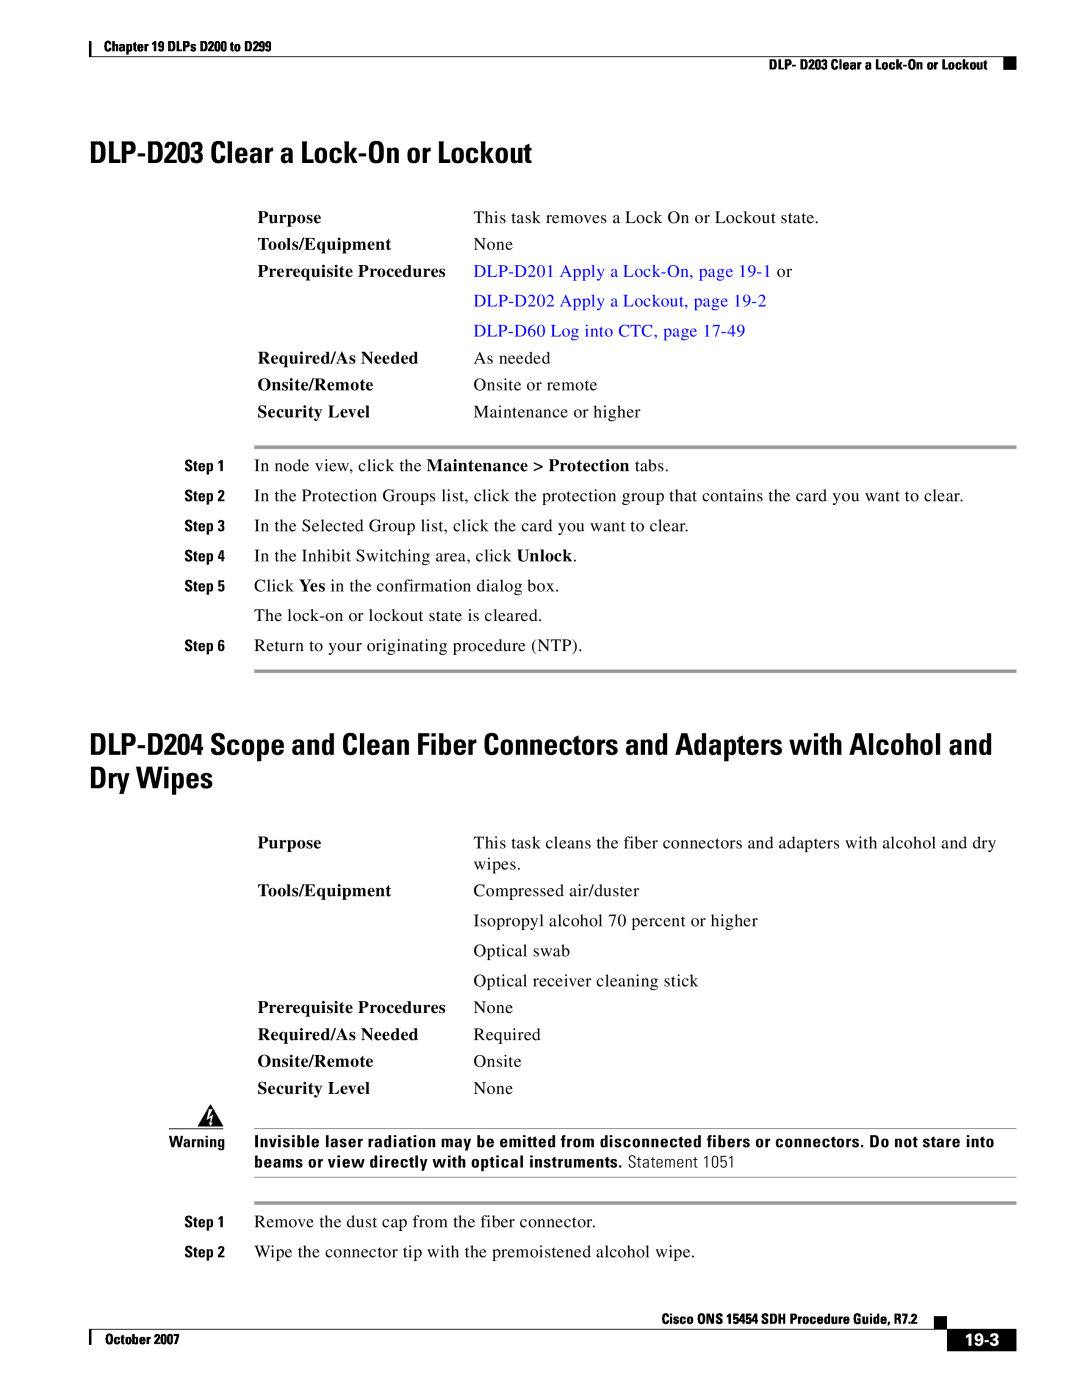 Cisco Systems D200 manual DLP-D203 Clear a Lock-On or Lockout, DLP-D201 Apply a Lock-On, page 19-1 or, 19-3 